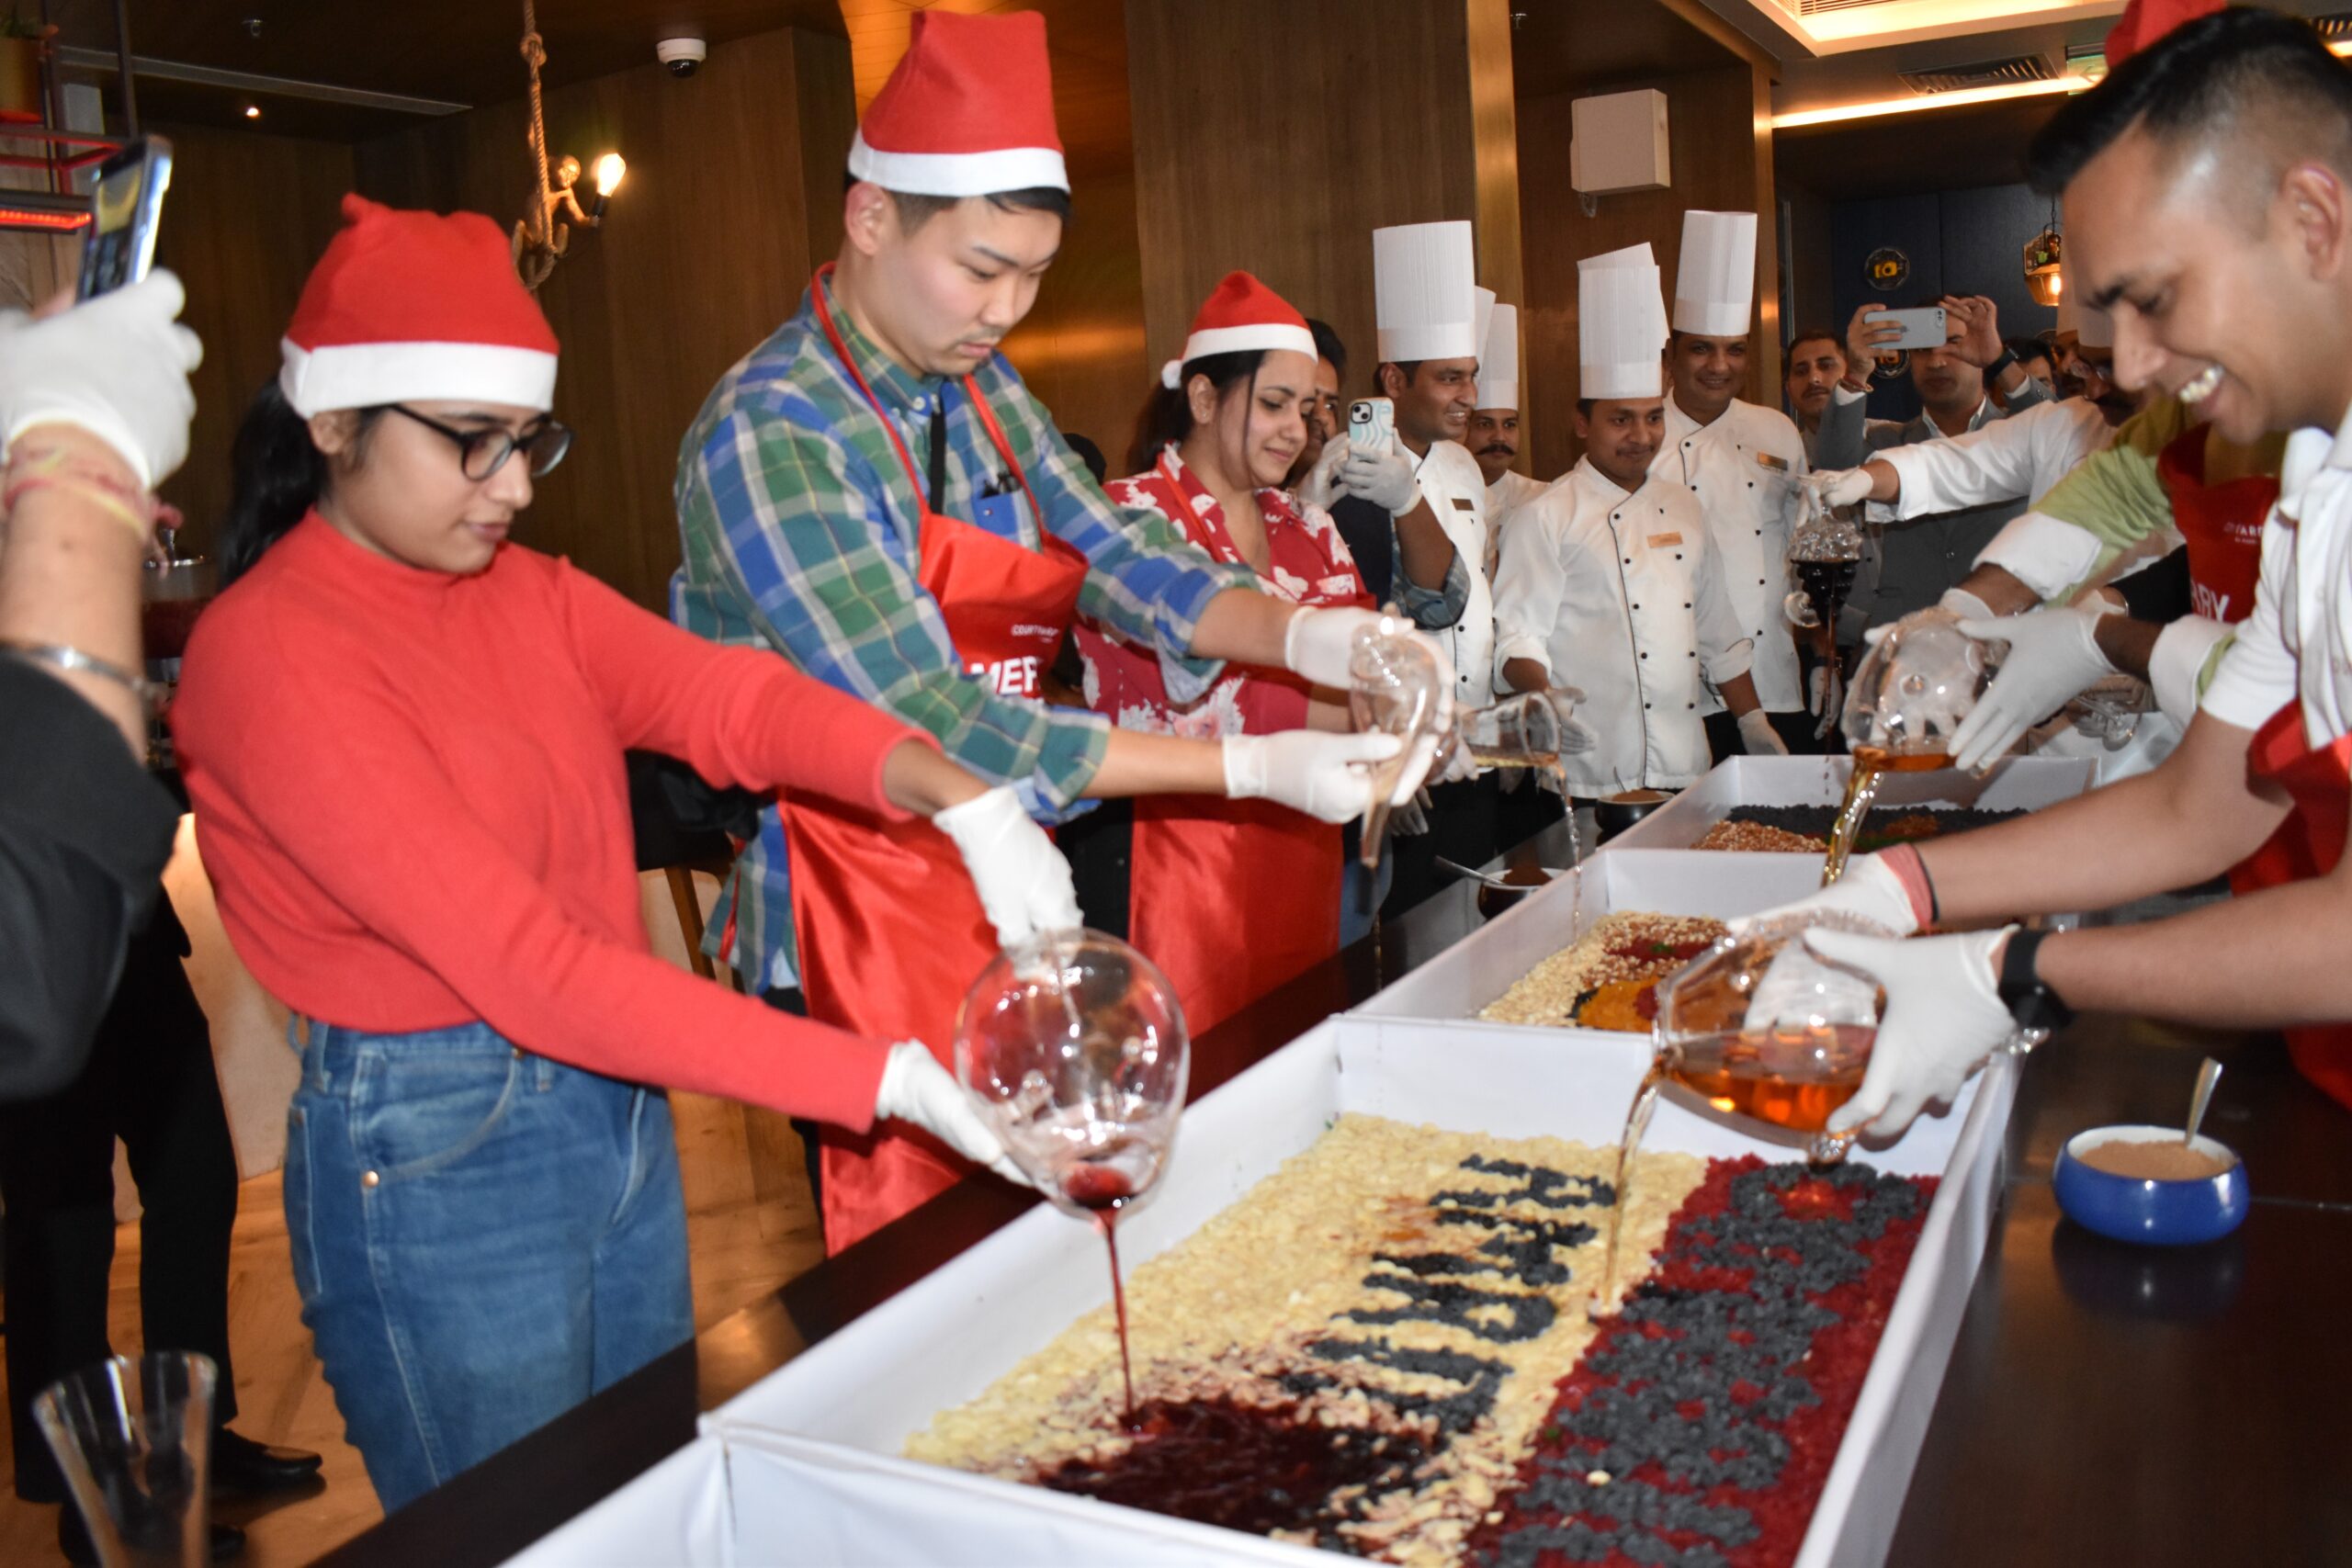 Courtyard by Marriott Amritsar starts the festive season with their Annual Cake Mixing Ceremony